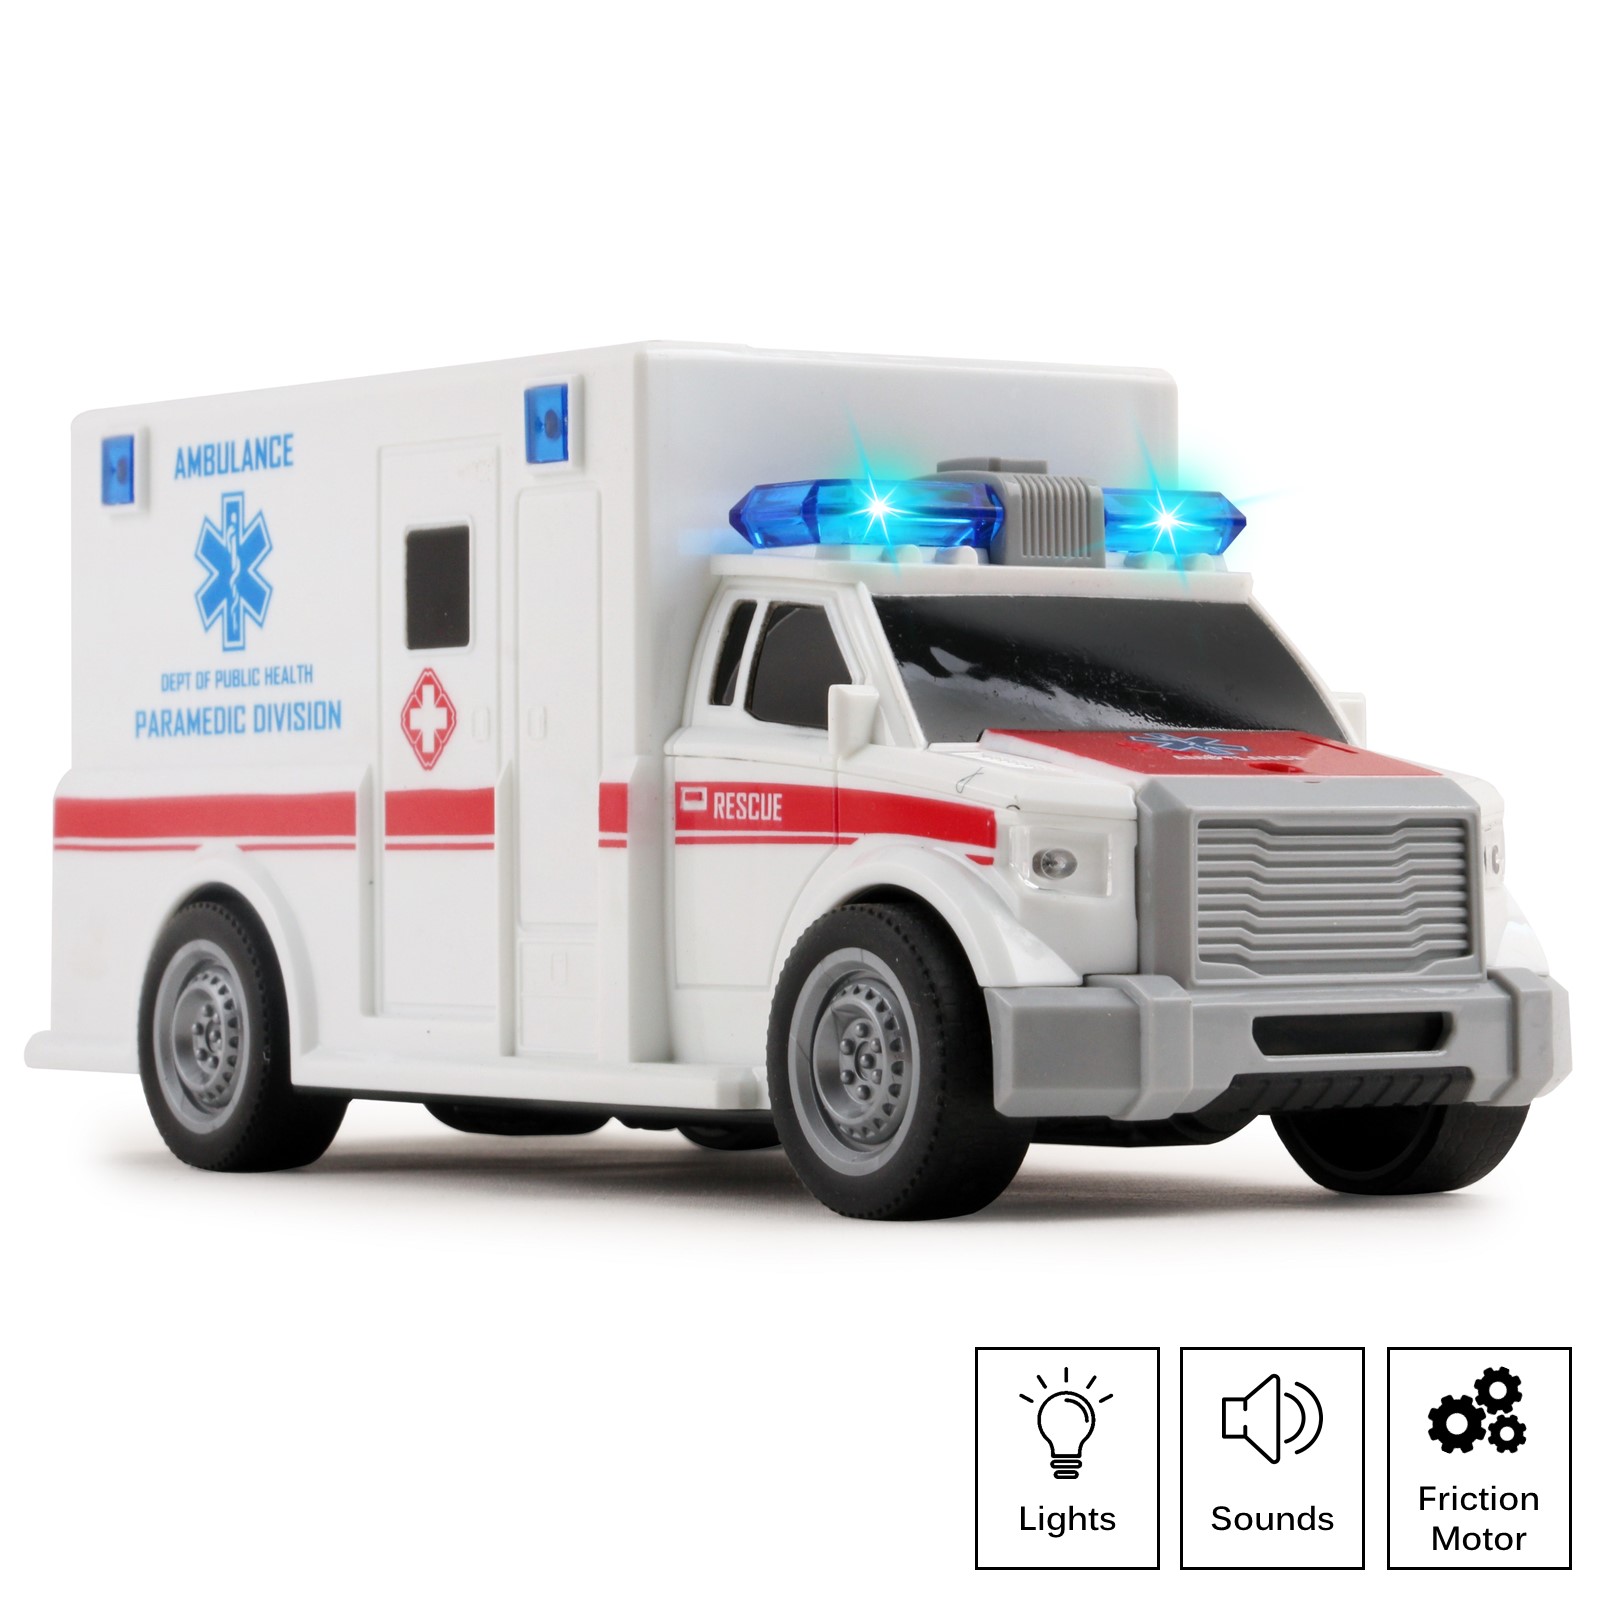 Rescue Ambulance Friction Powered 1:20 Scale Toy Car With Lights And Sounds Durable Kids Medical Transport Emergency Vehicle Push And Go Pretend Play Van Great Gift For Children Boys Girls